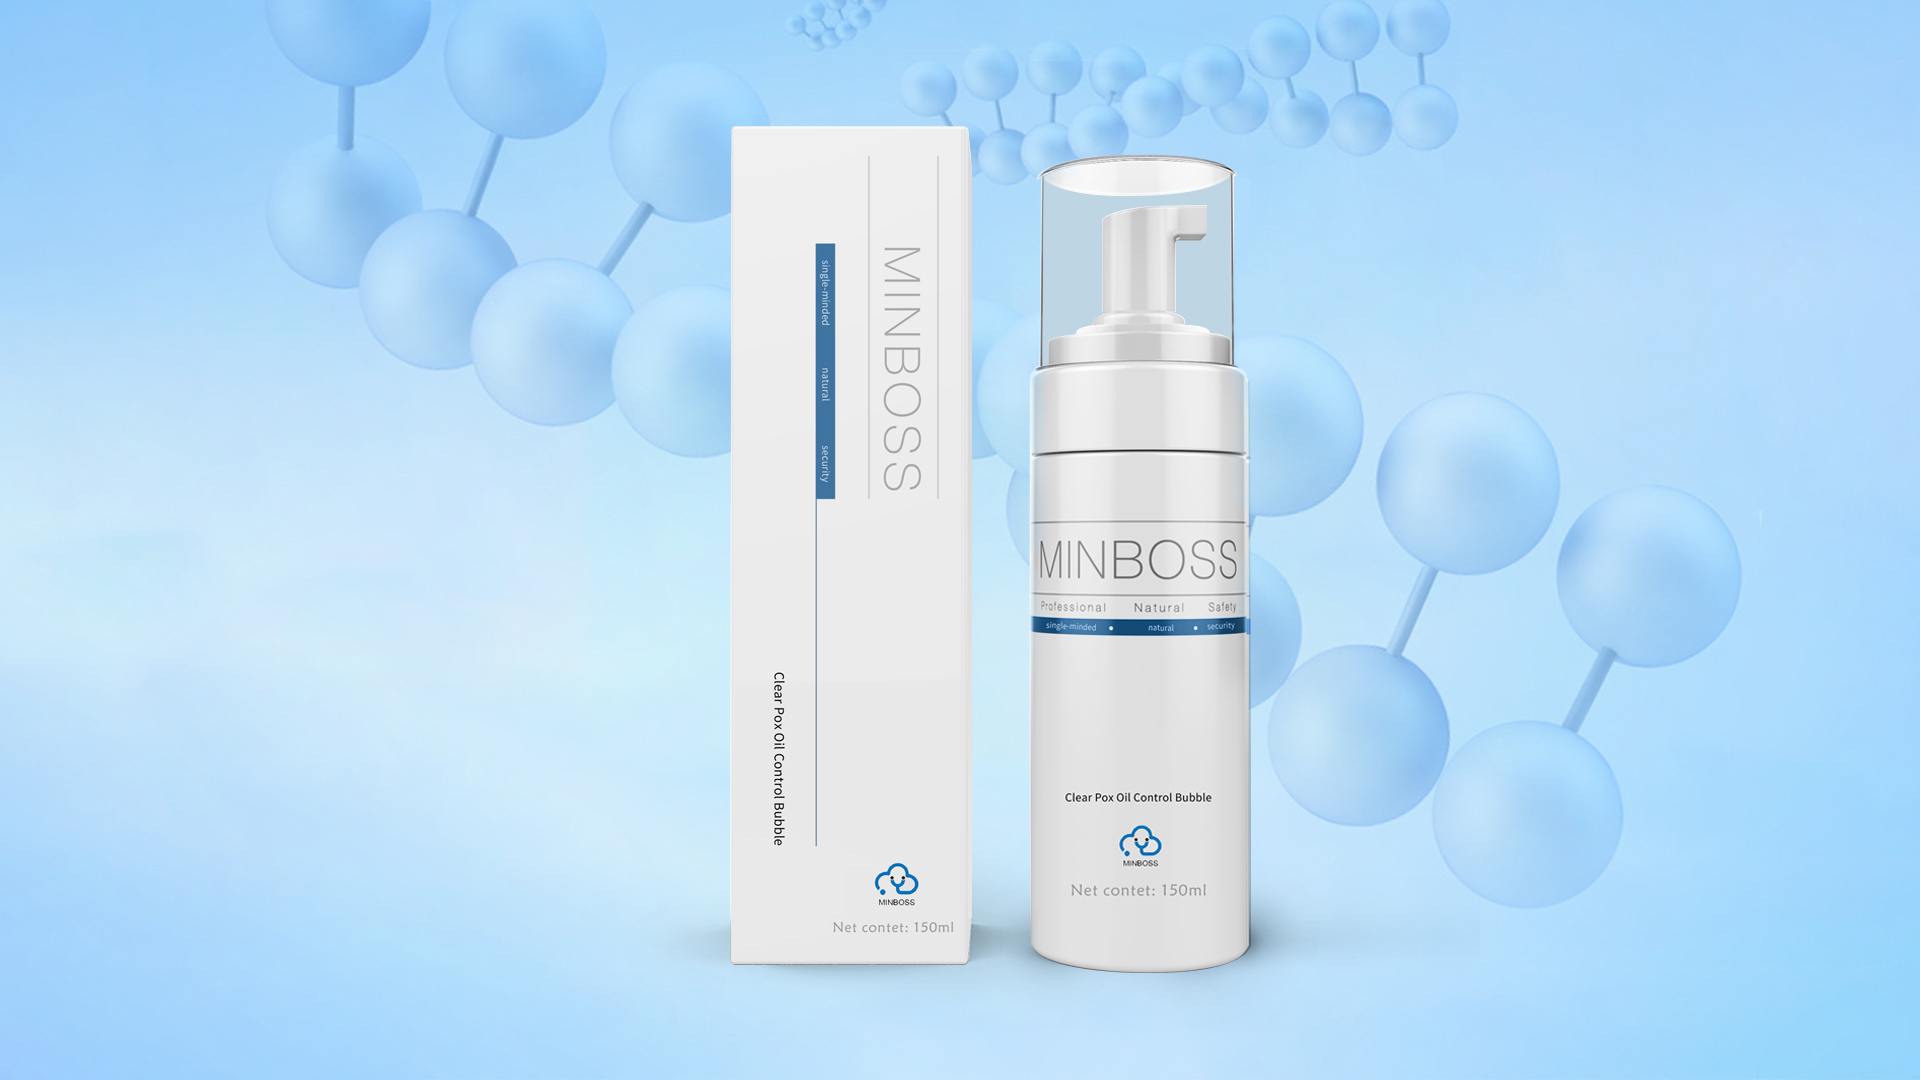 MINBOSS Clear Pox Oil Control Bubble-Daily Facial Cleanser Foam, Best Face Wash for Acne, Oil & Sensitive Skin to Remove Dirt, Oil & Makeup